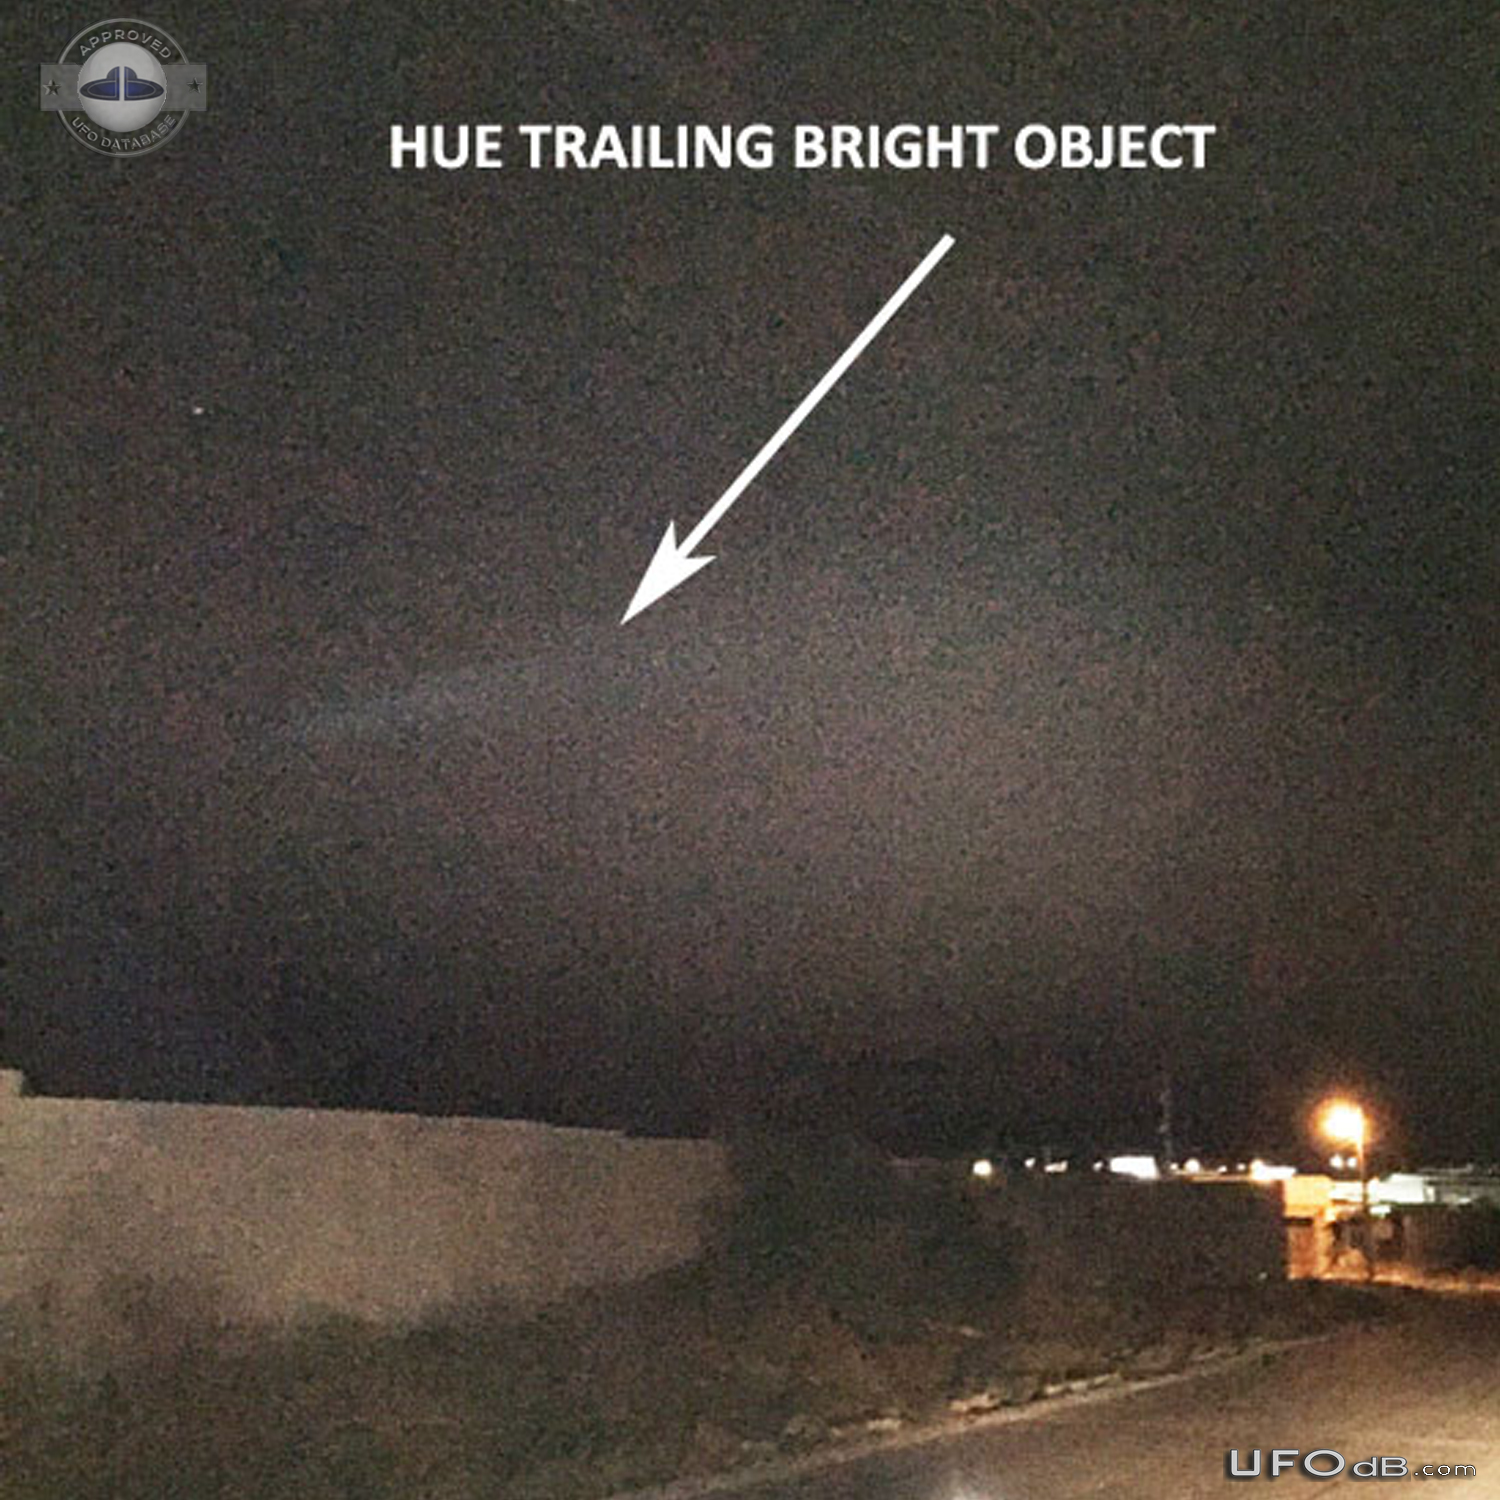 Cigar Shaped UFO With Green-Blue Mist Seen in Pahrump Nevada USA 2015 UFO Picture #759-1